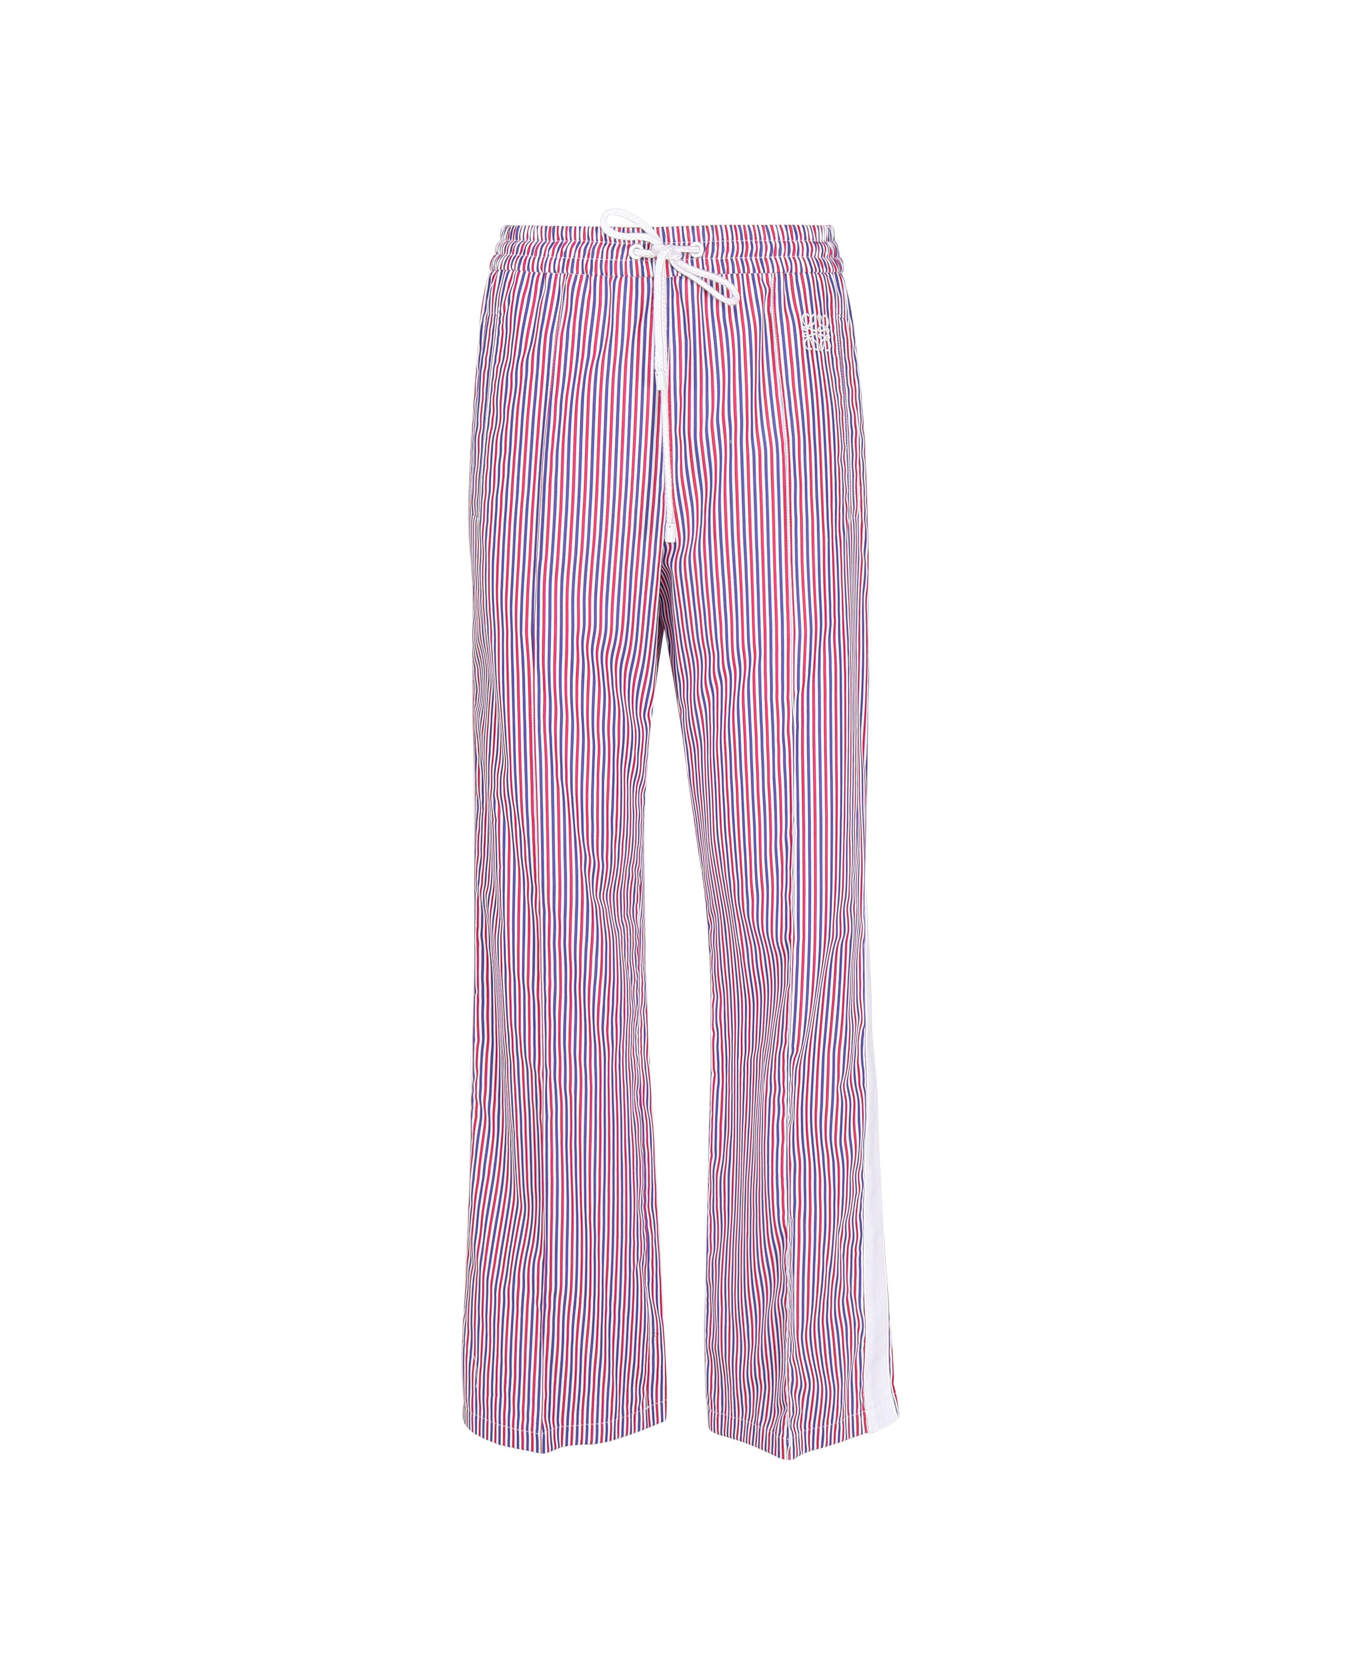 Loewe Striped Cotton Tracksuit vask Trousers - Blue/red/white